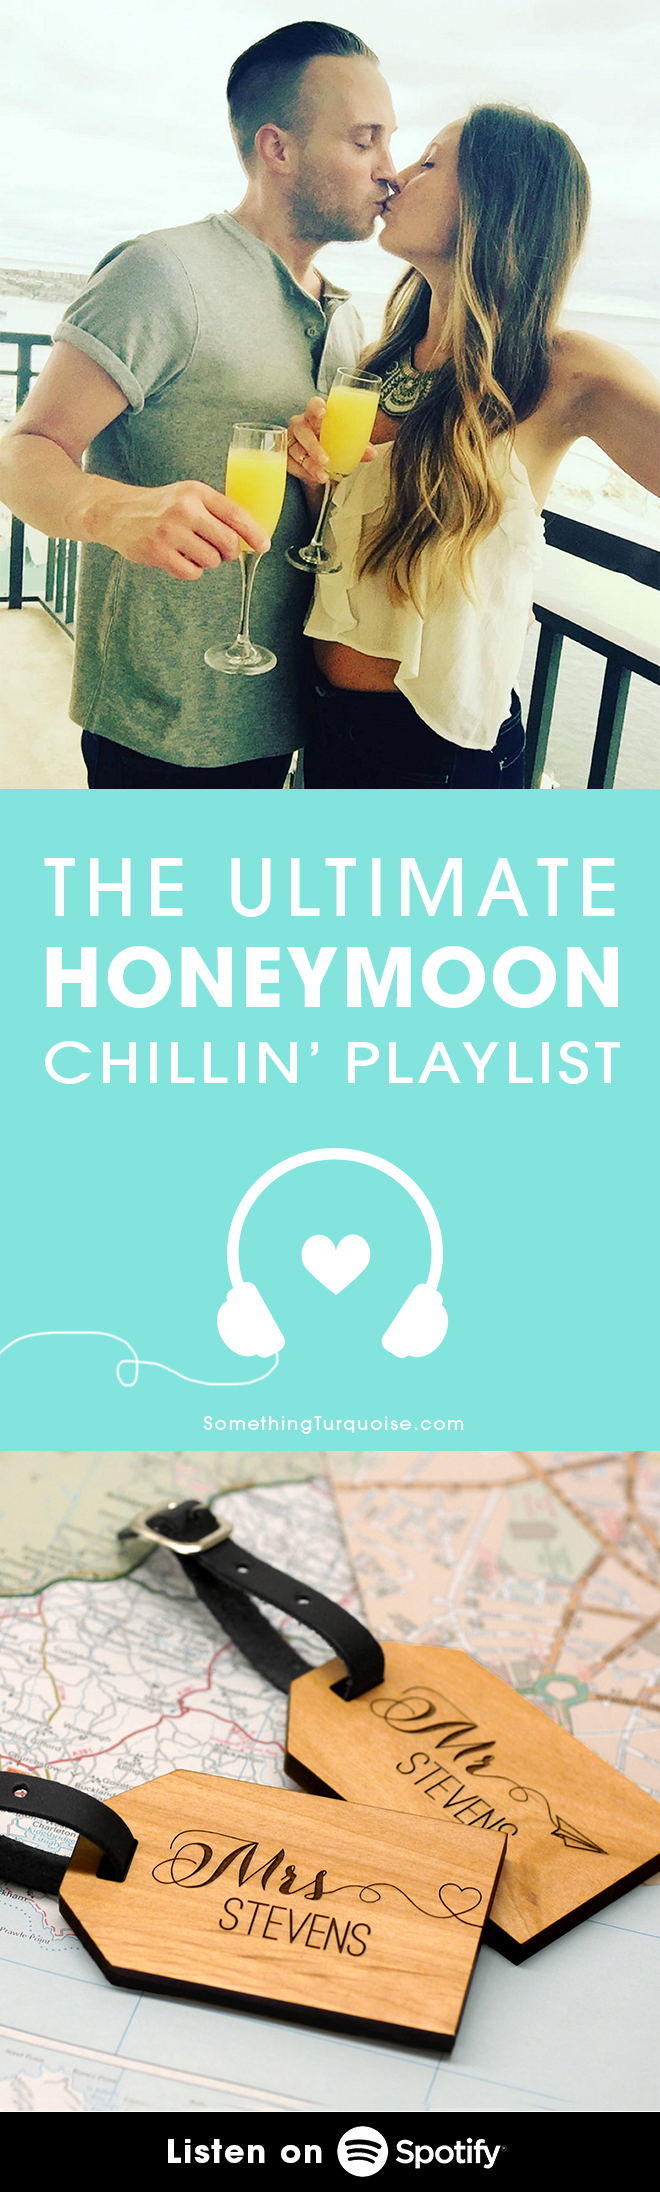 Awesome list of romantic, vibey songs for listening to on your honeymoon!